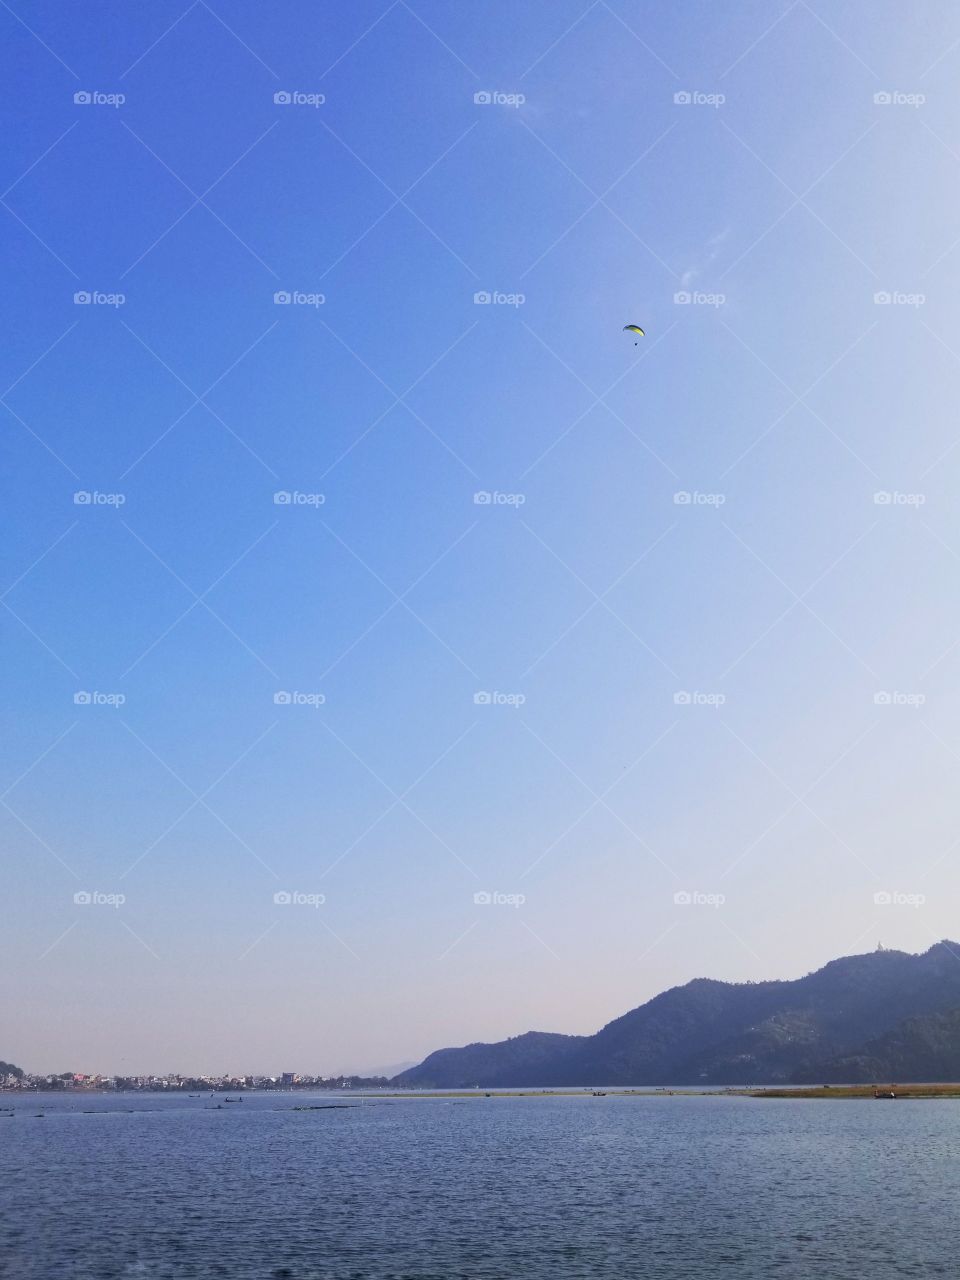 On the shores of Phewa Lake with a paraglider in the sky. The sky is a gorgeous blue which complements the blue in the foothills in the distance. It is almost a cloudless day.